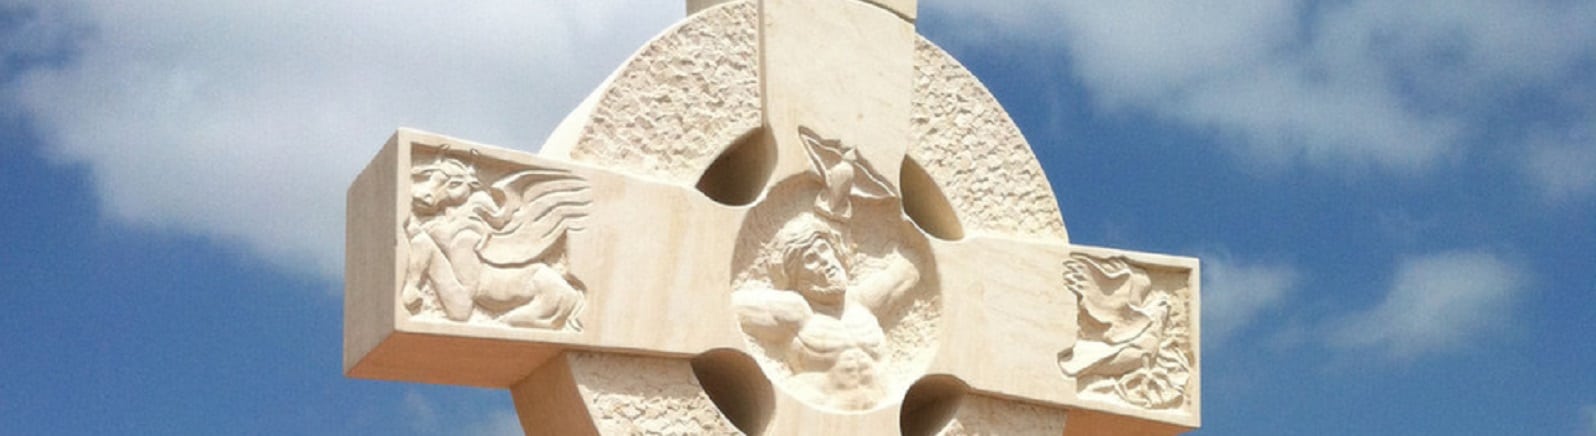 Figurative Site-specific sculptures in limestone placed at St. Philips Church in Frisco, TX